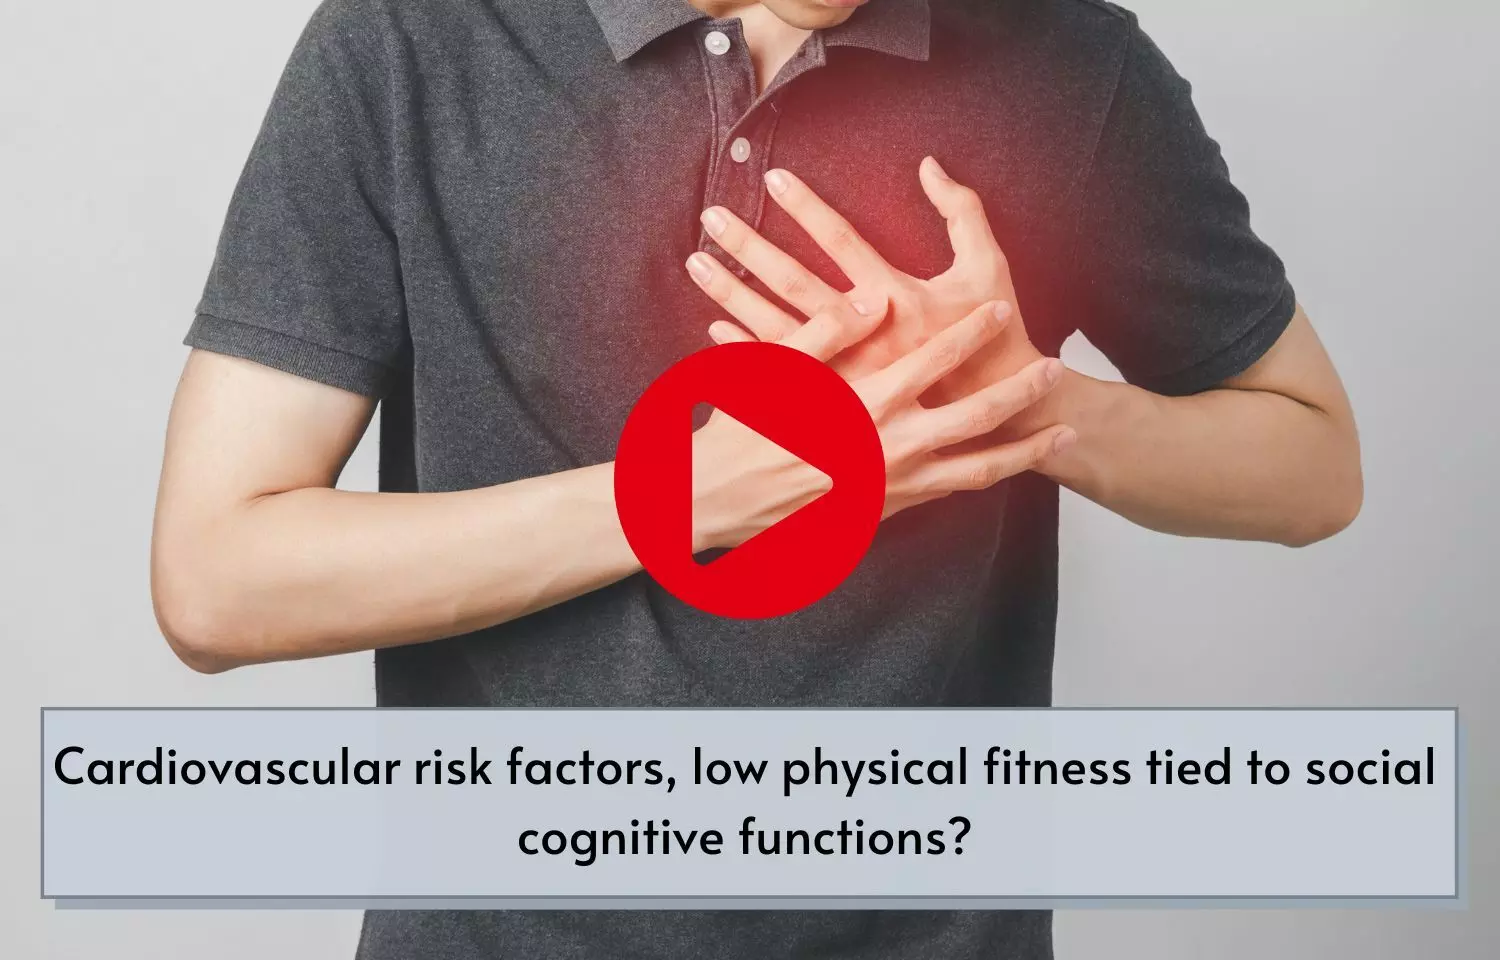 Cardiovascular risk factors, low physical fitness tied to social cognitive functions?